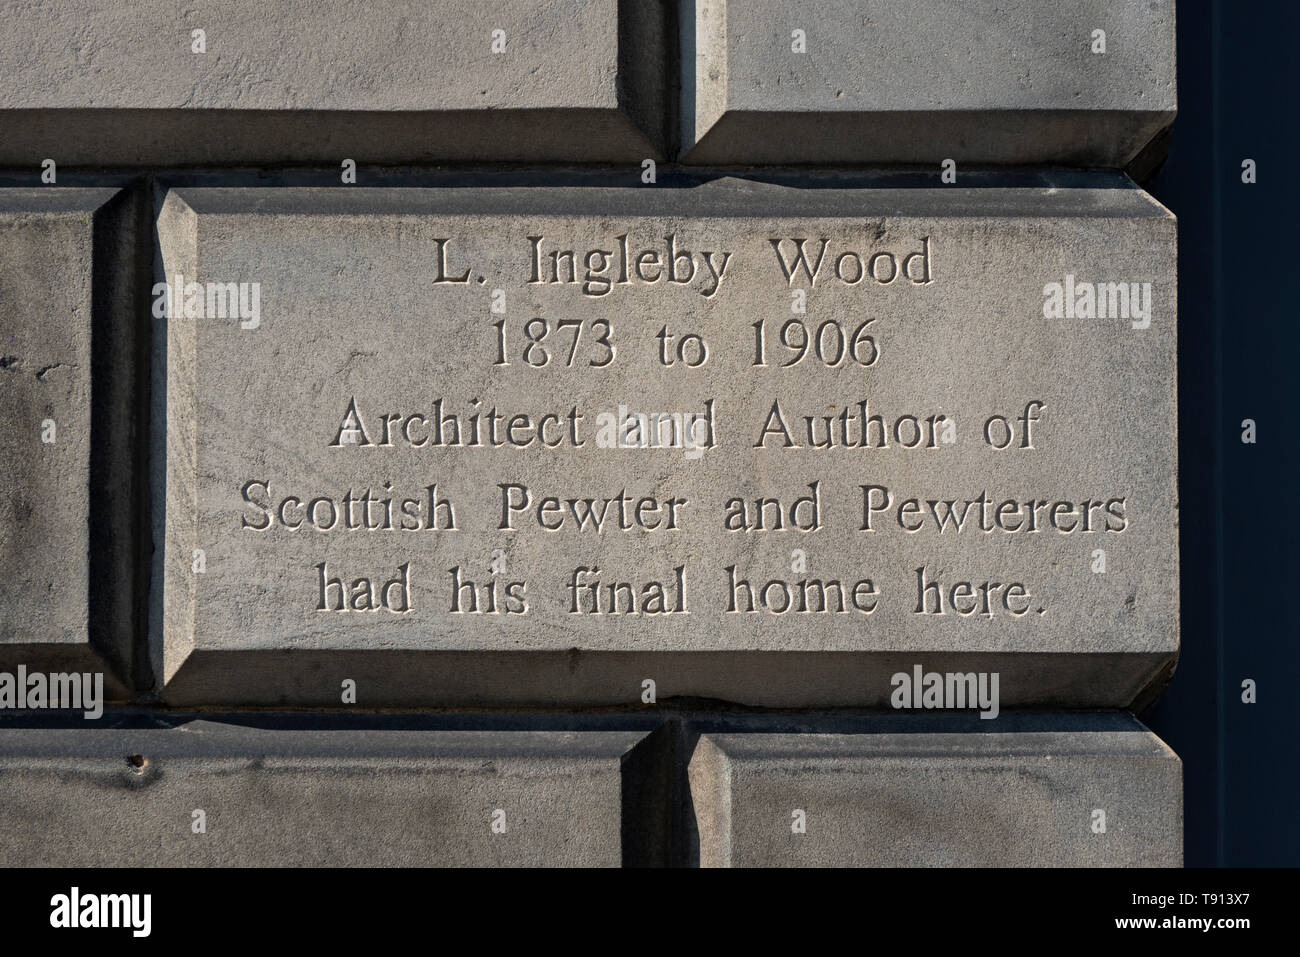 Inscription at  84 Great King Street in Edinburgh where L. Ingleby Wood, architect and author of 'Scottish Pewter and Pewterers' once lived. Stock Photo